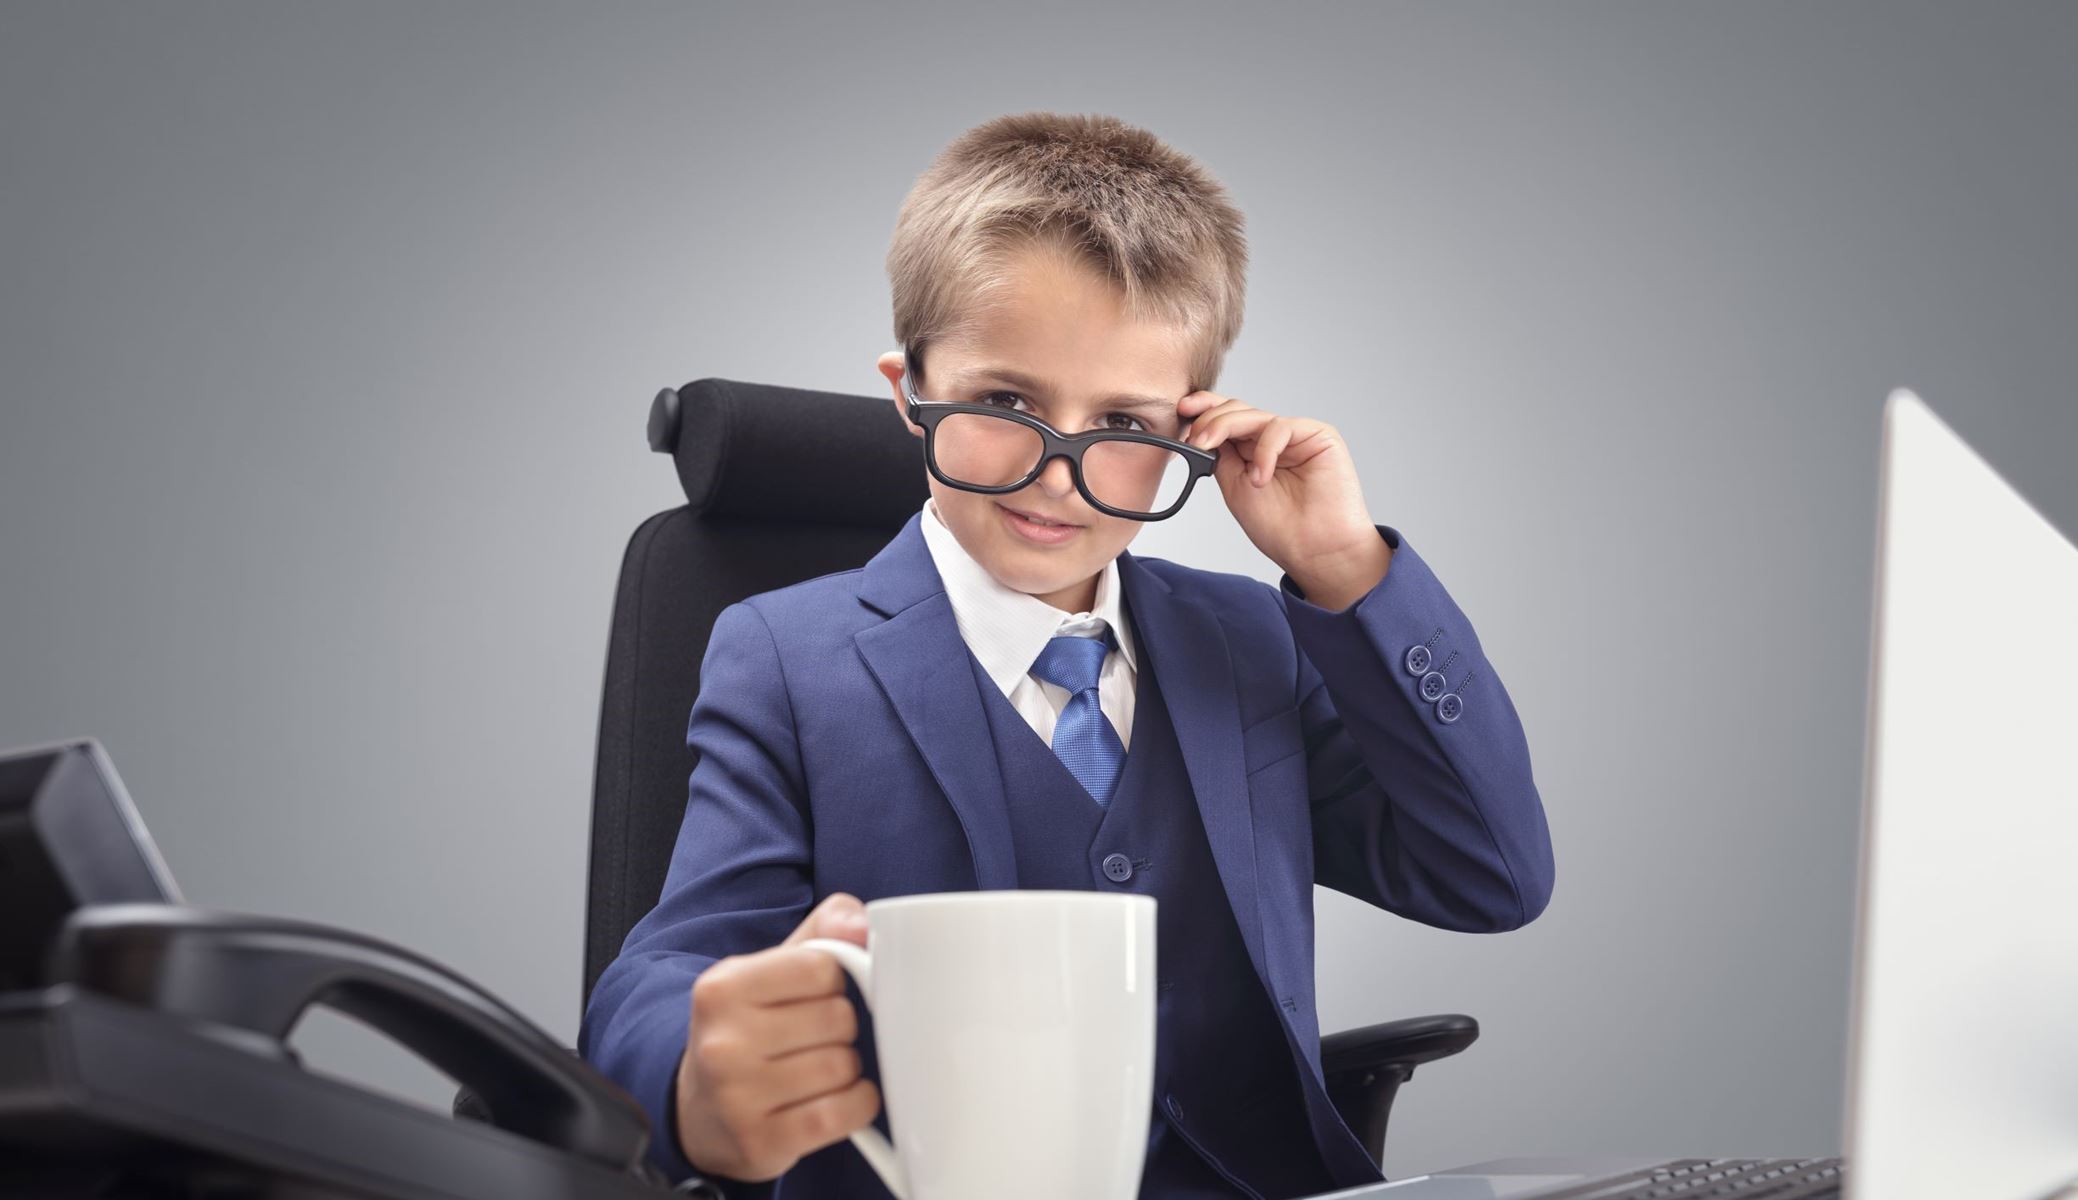 Kid dressed in a suit and tie, sitting at a computer with a coffee mug